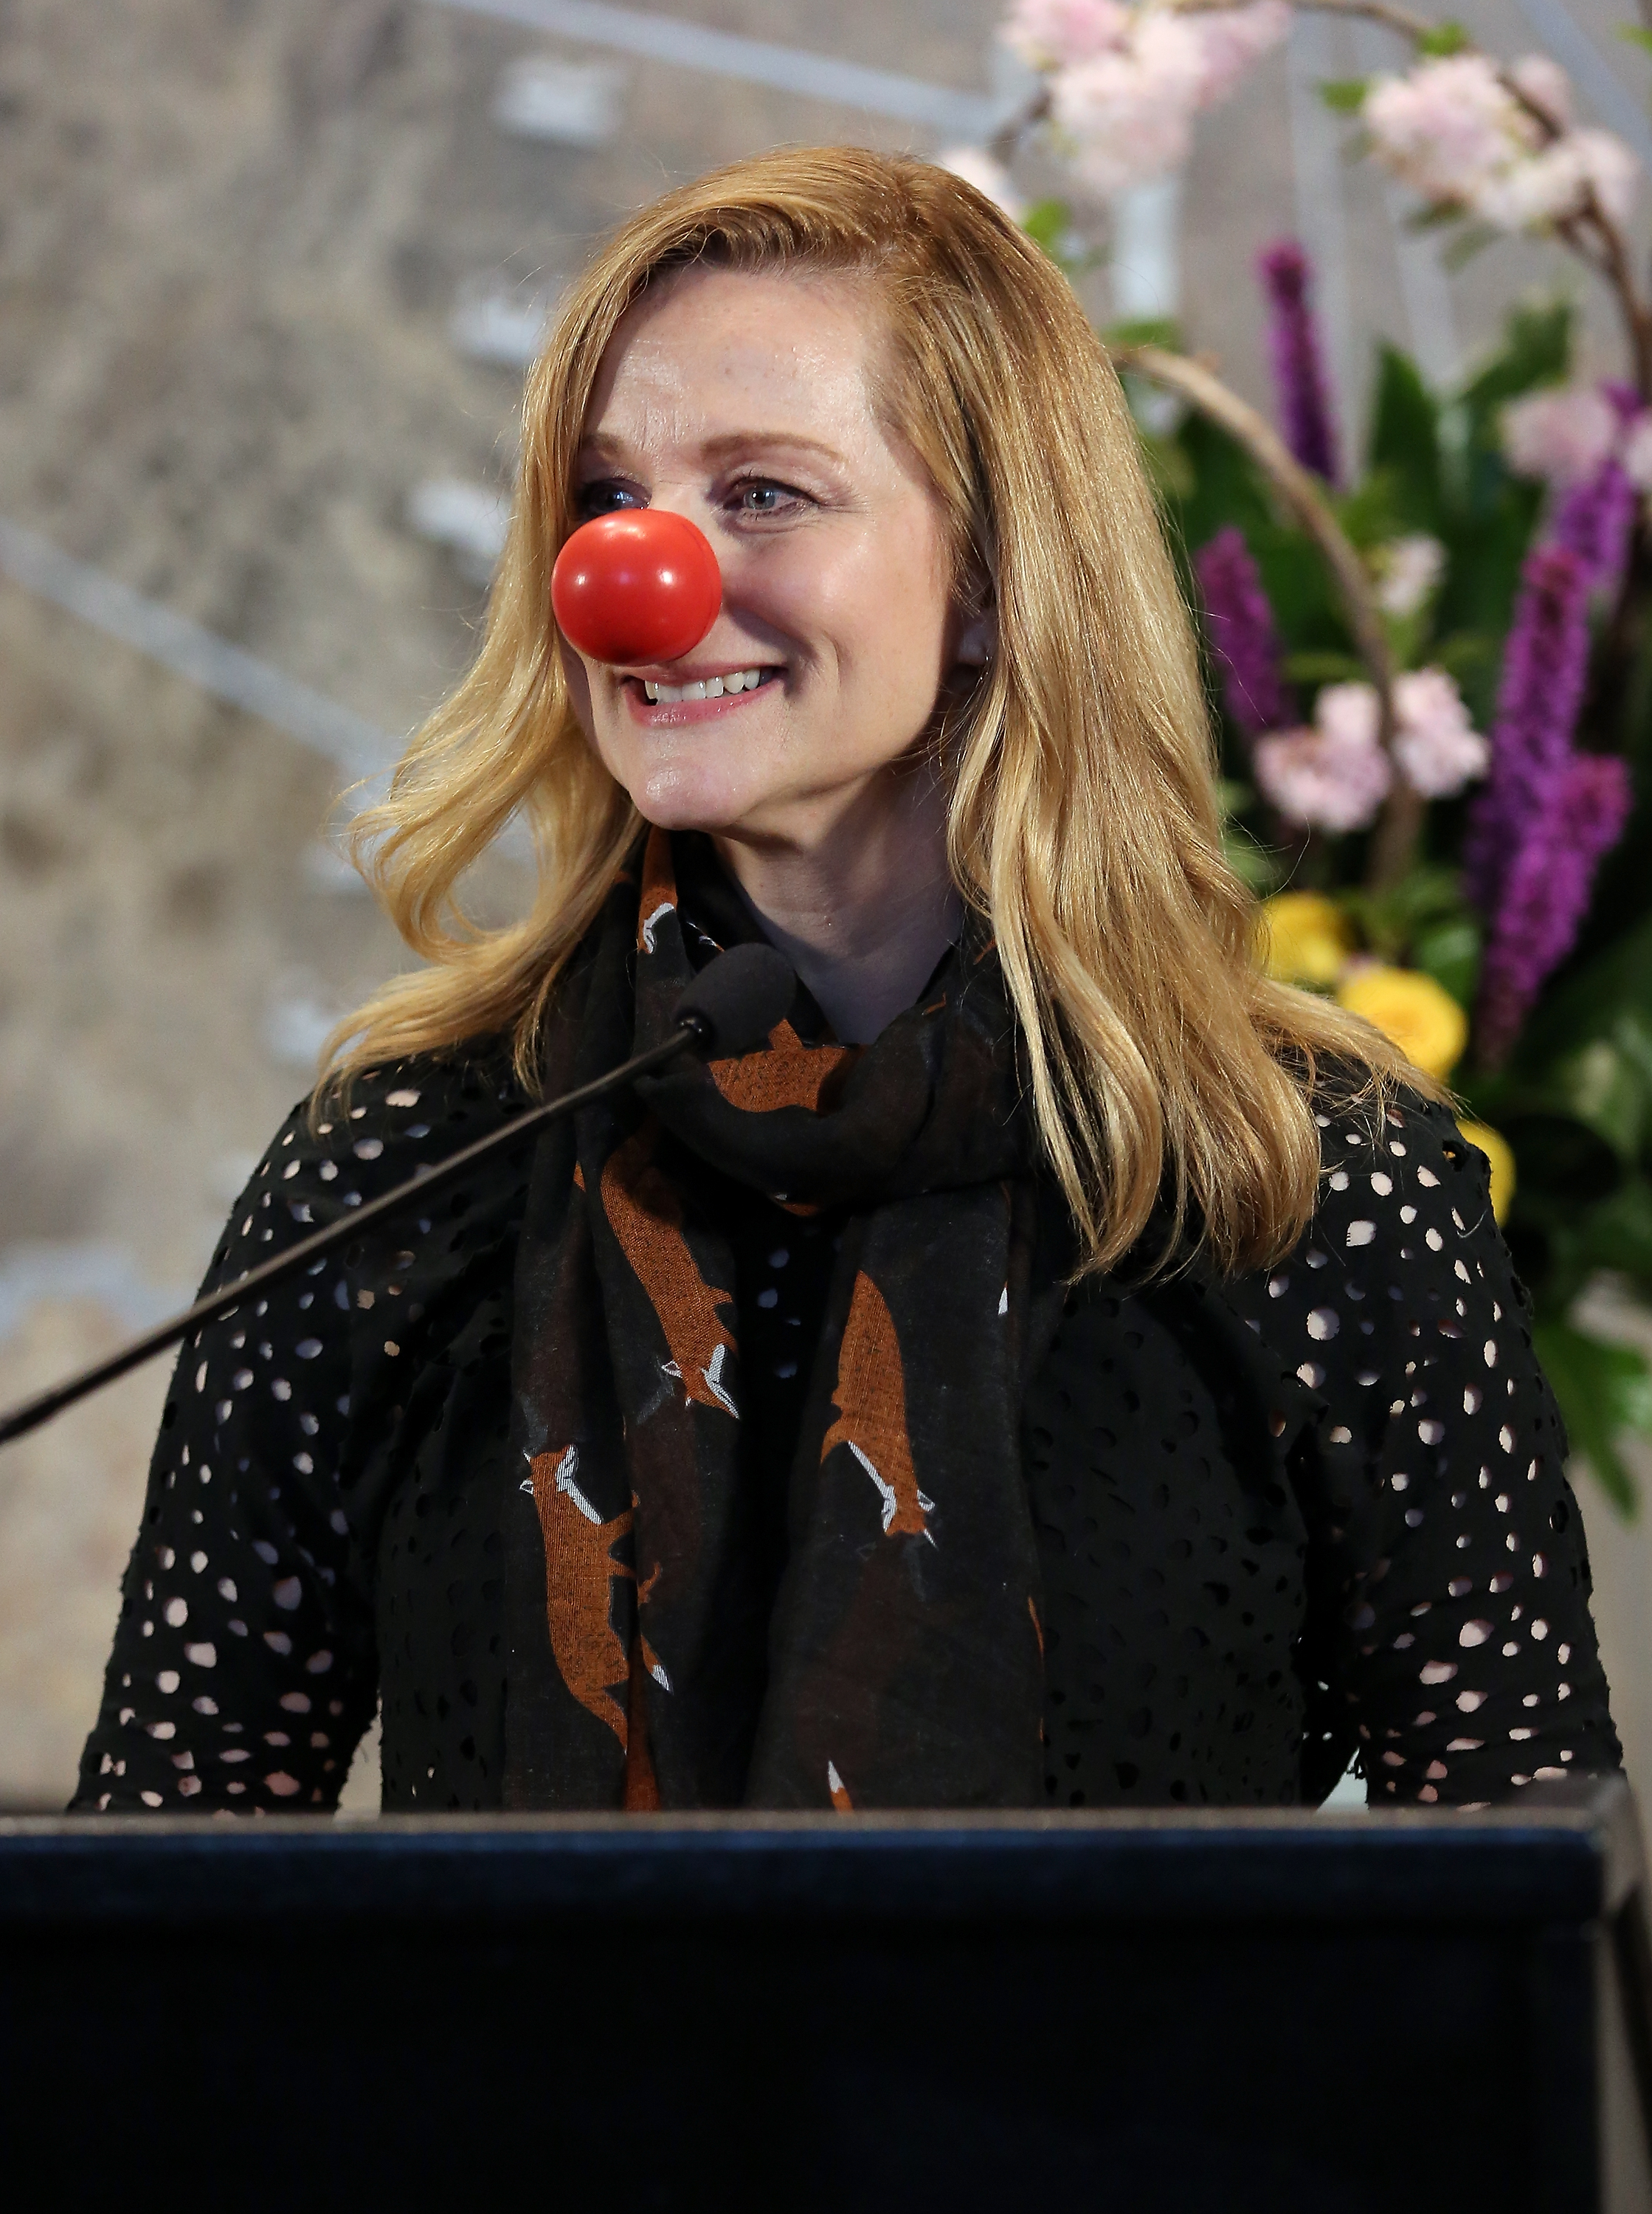 NEW YORK, NY - MAY 25:  Actress Laura Linney speaks at the lighting of The Empire State Building in honor of Red Nose Day at The Empire State Building on May 25, 2017 in New York City.  (Photo by Monica Schipper/WireImage) (Monica Schipper&mdash;WireImage)